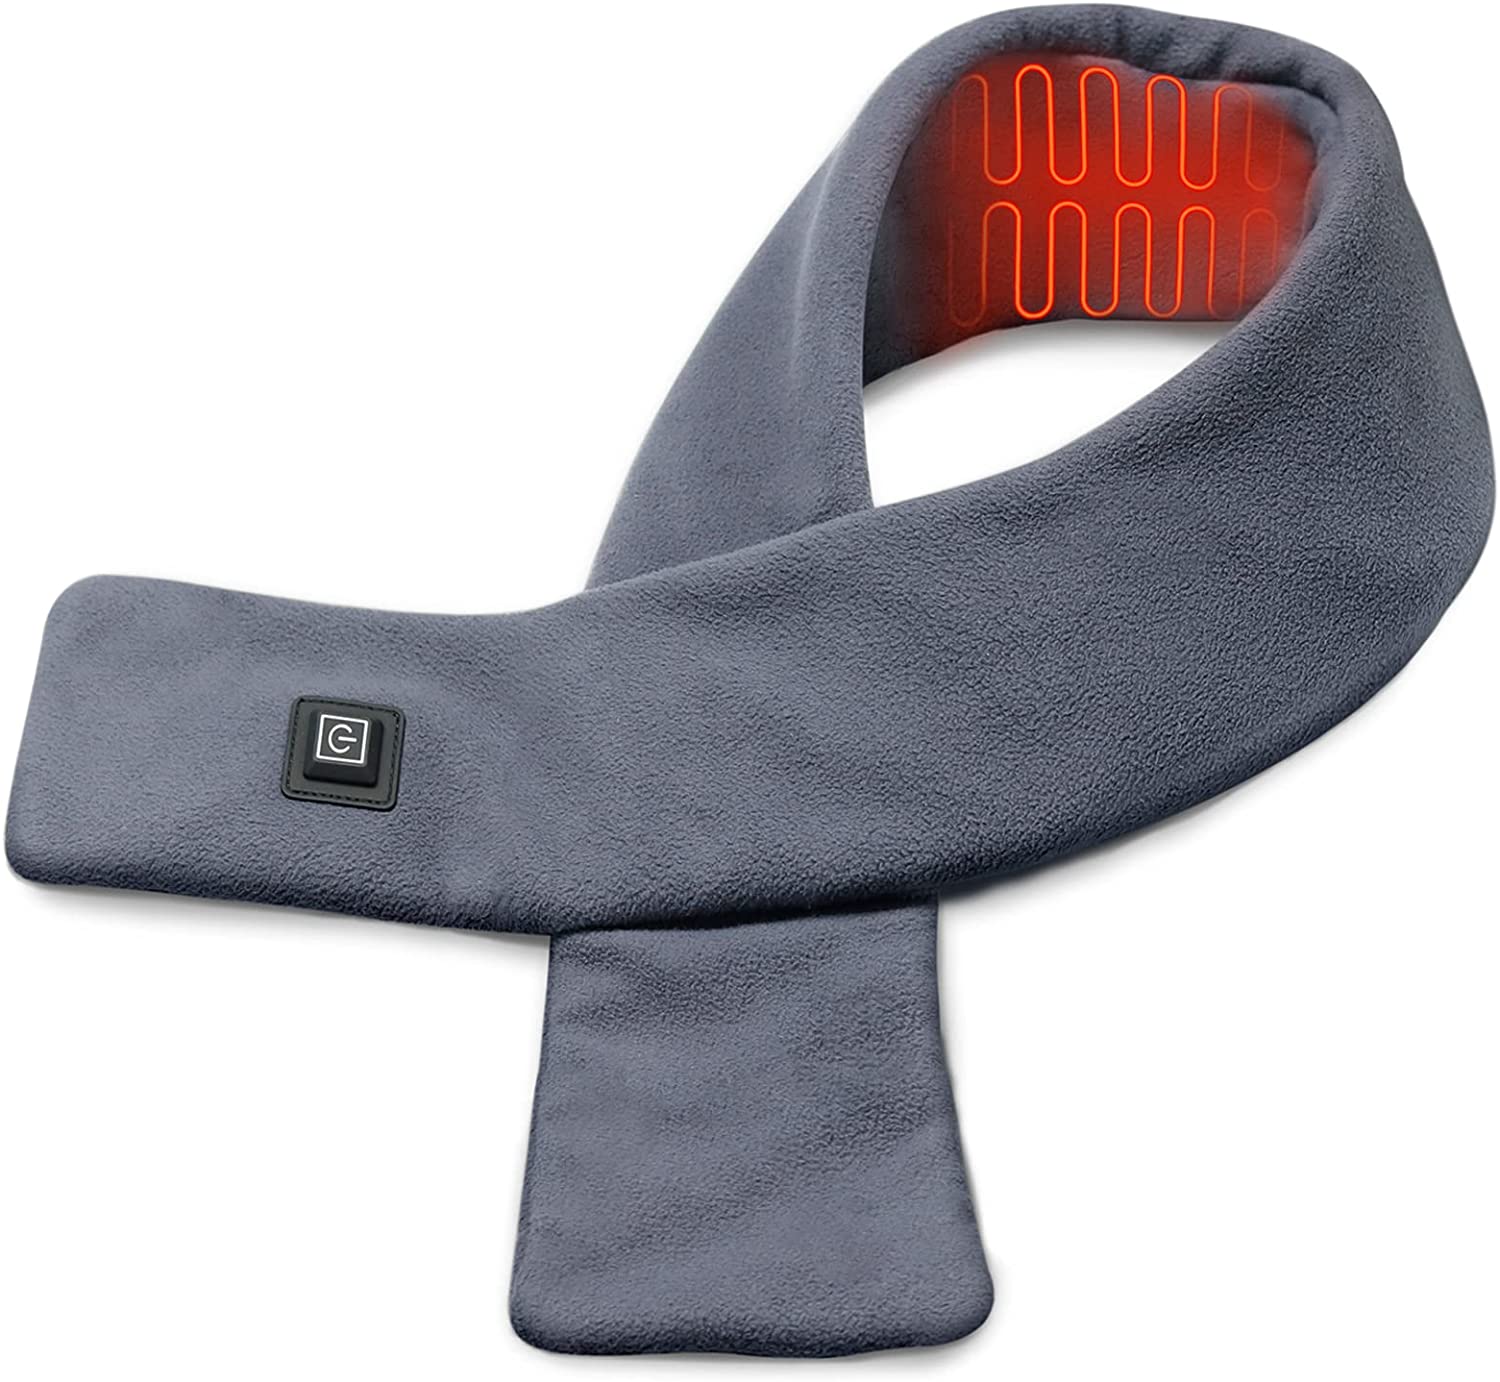 5 Easy Steps to Build a far Infrared Heating Pads 2